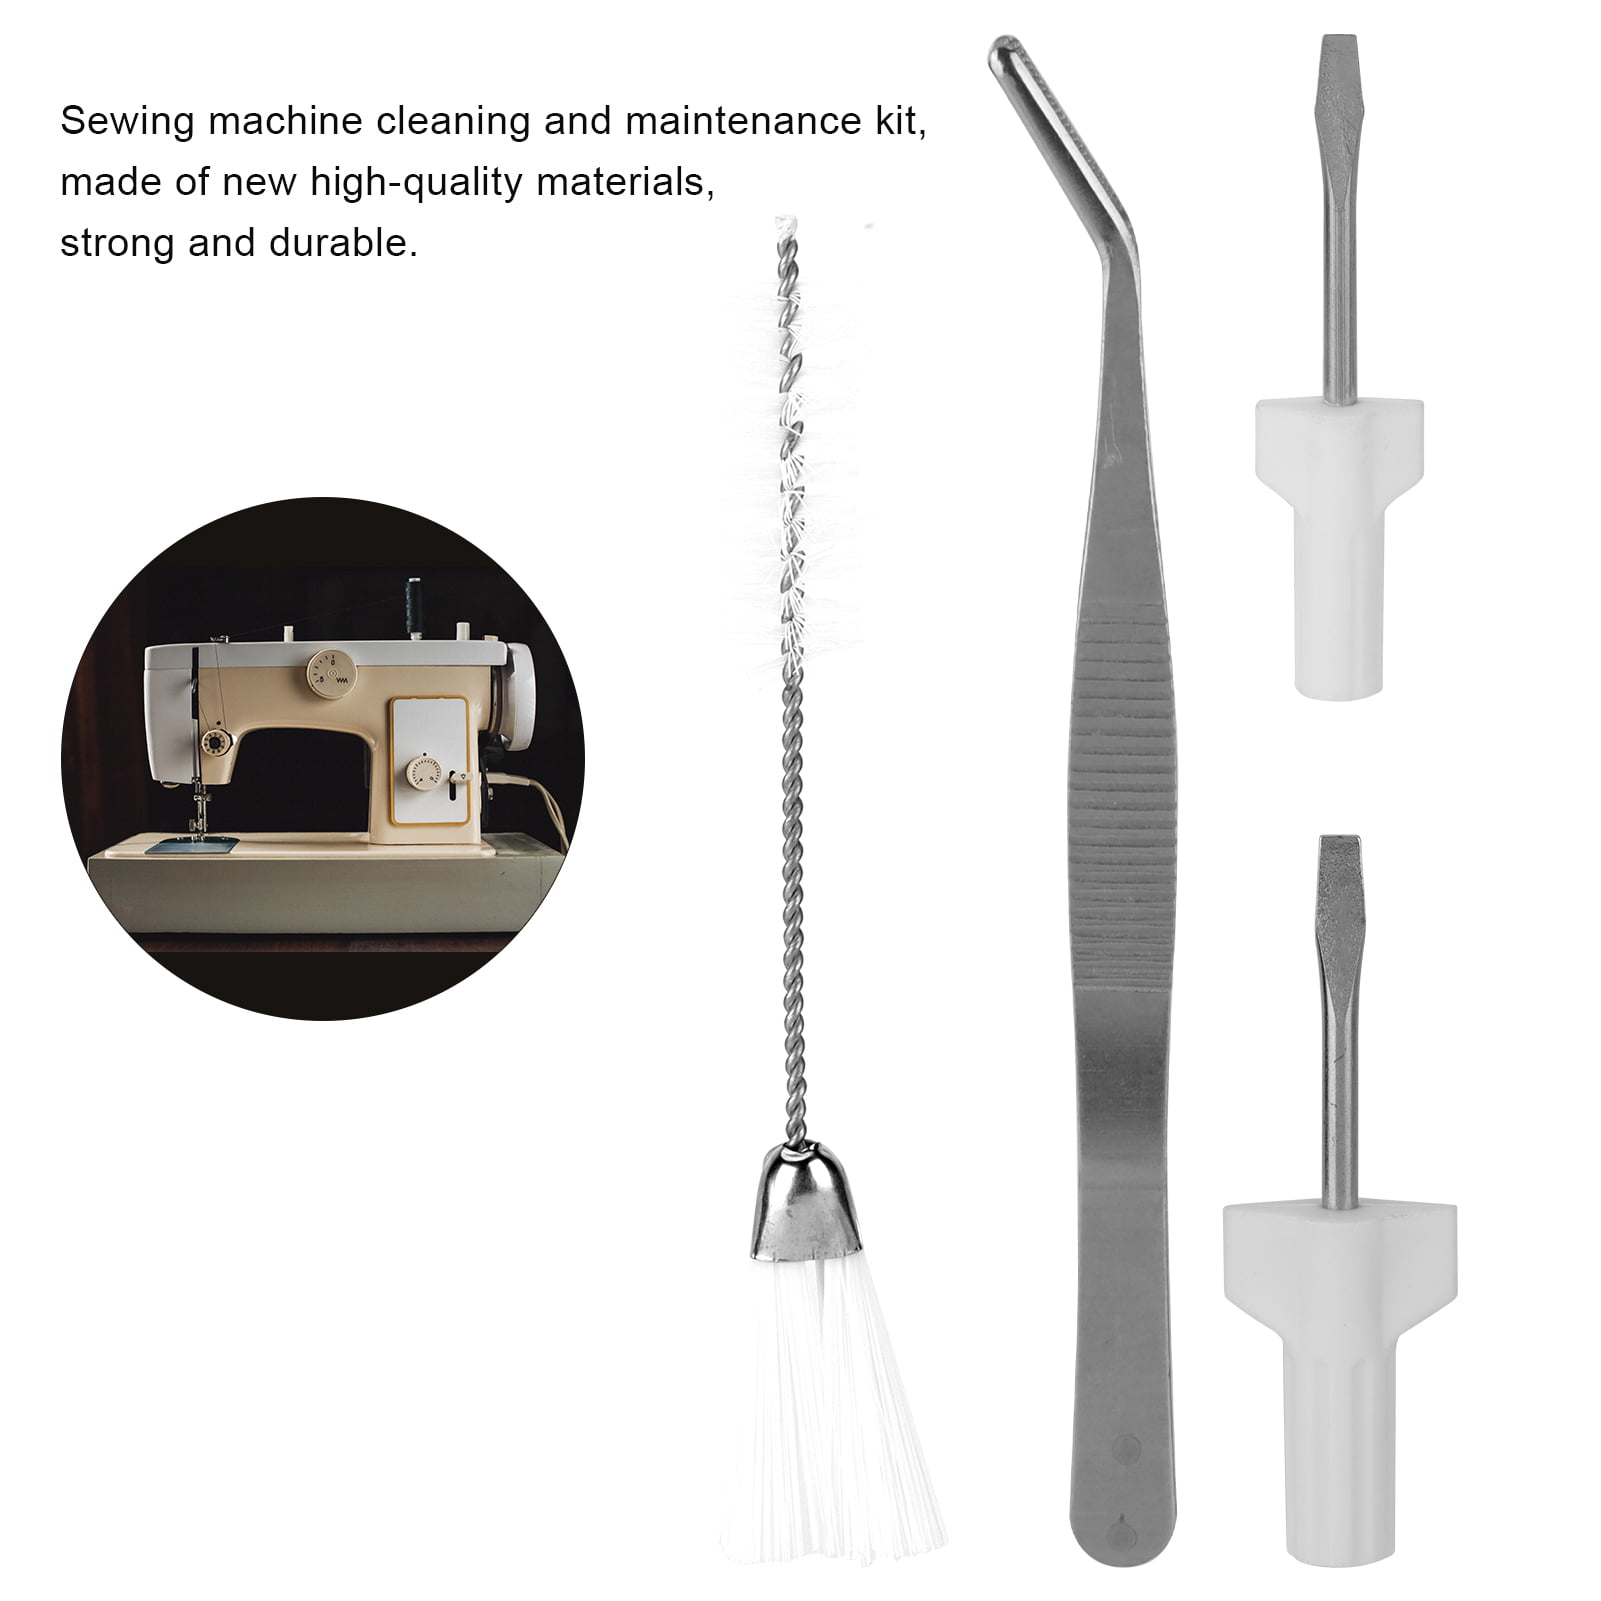 4pcs Set Sewing Machine Cleaning Kit Sewing Machine Double Ended Cleaning  Brush Screwdrivers Elbow Tweezers Cleaning Tools for Cleaning The Sewing